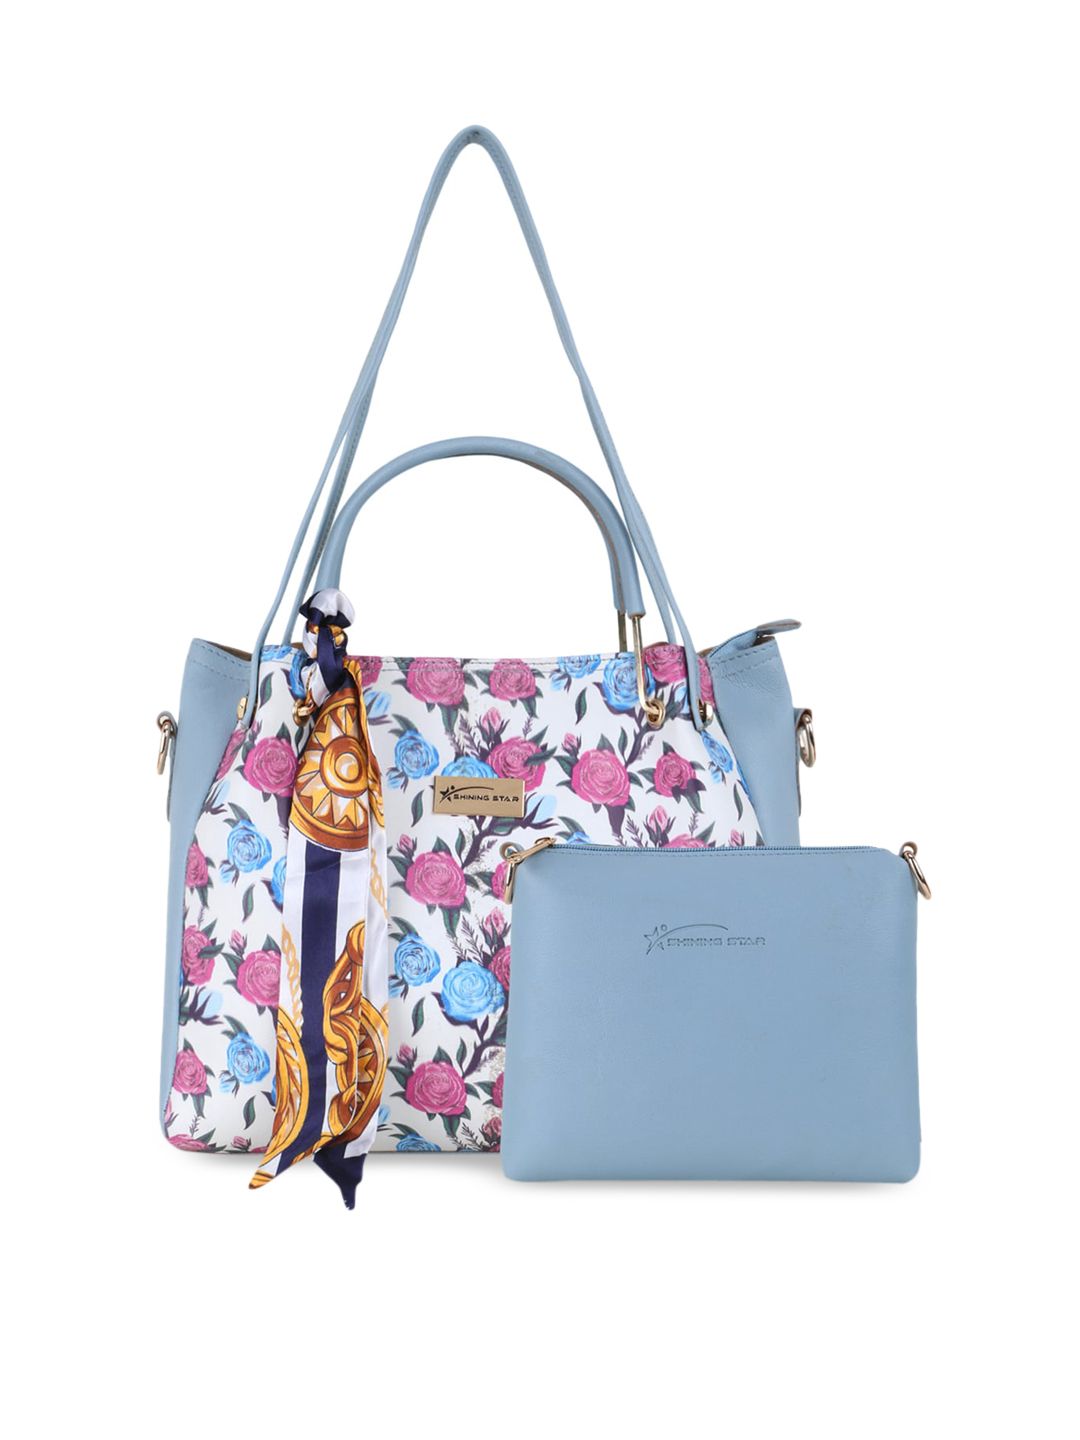 SHINING STAR Blue Floral Printed PU Shopper Handheld Bag With Pouch Price in India